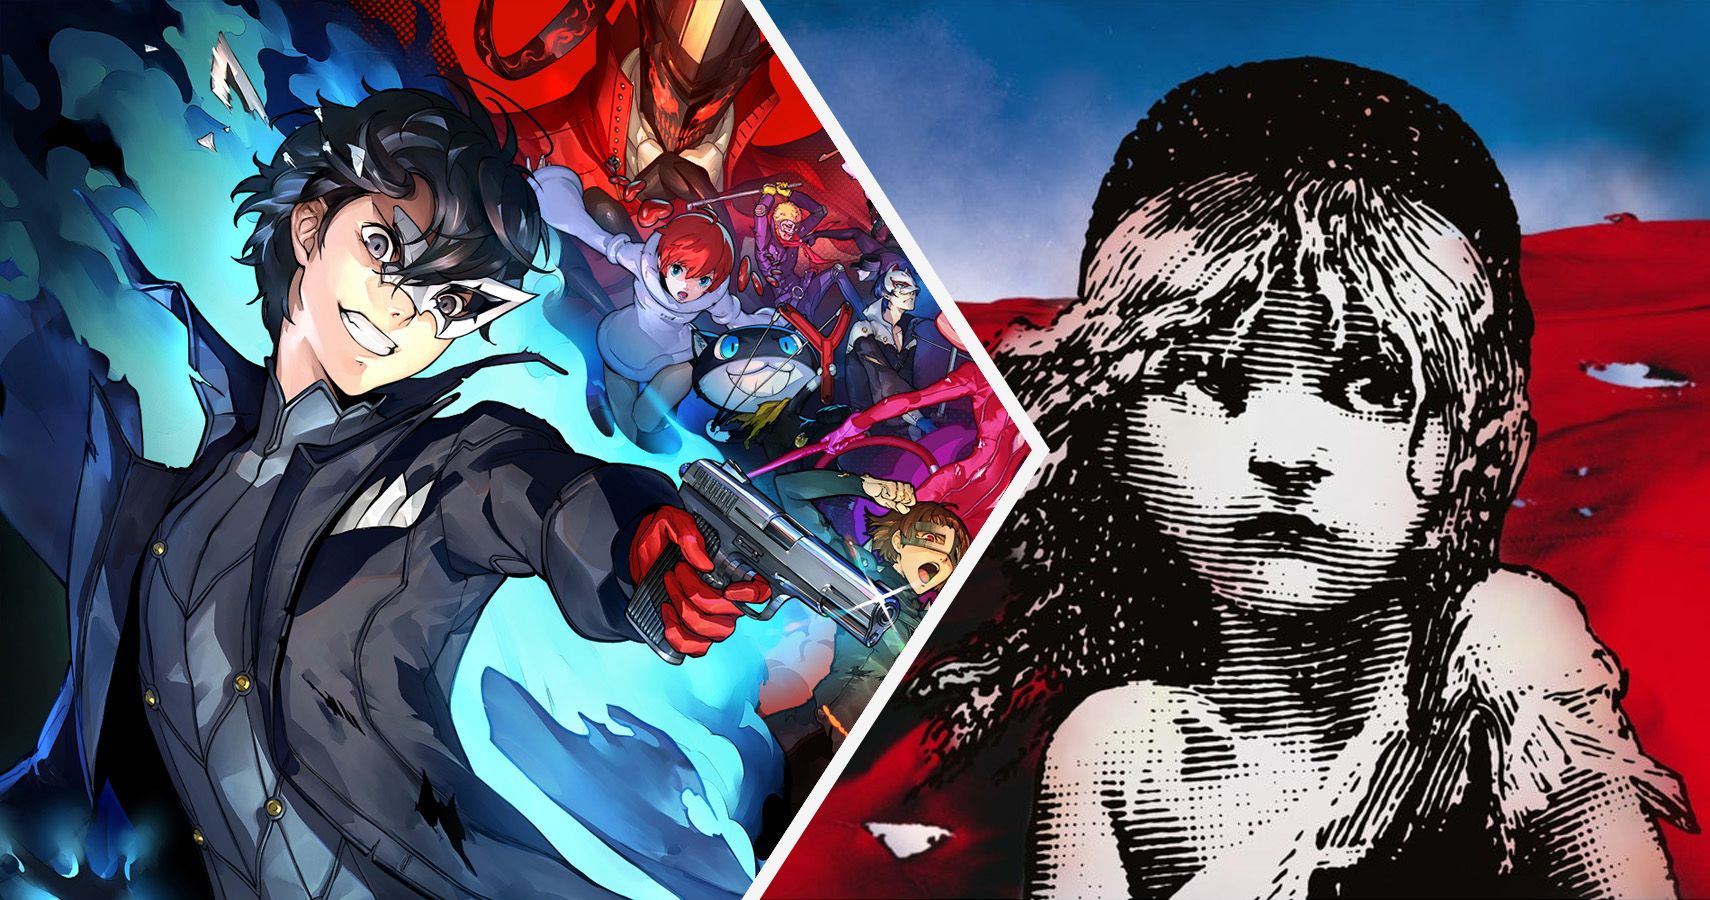 Persona 5 Strikers Les Miserables reference collage